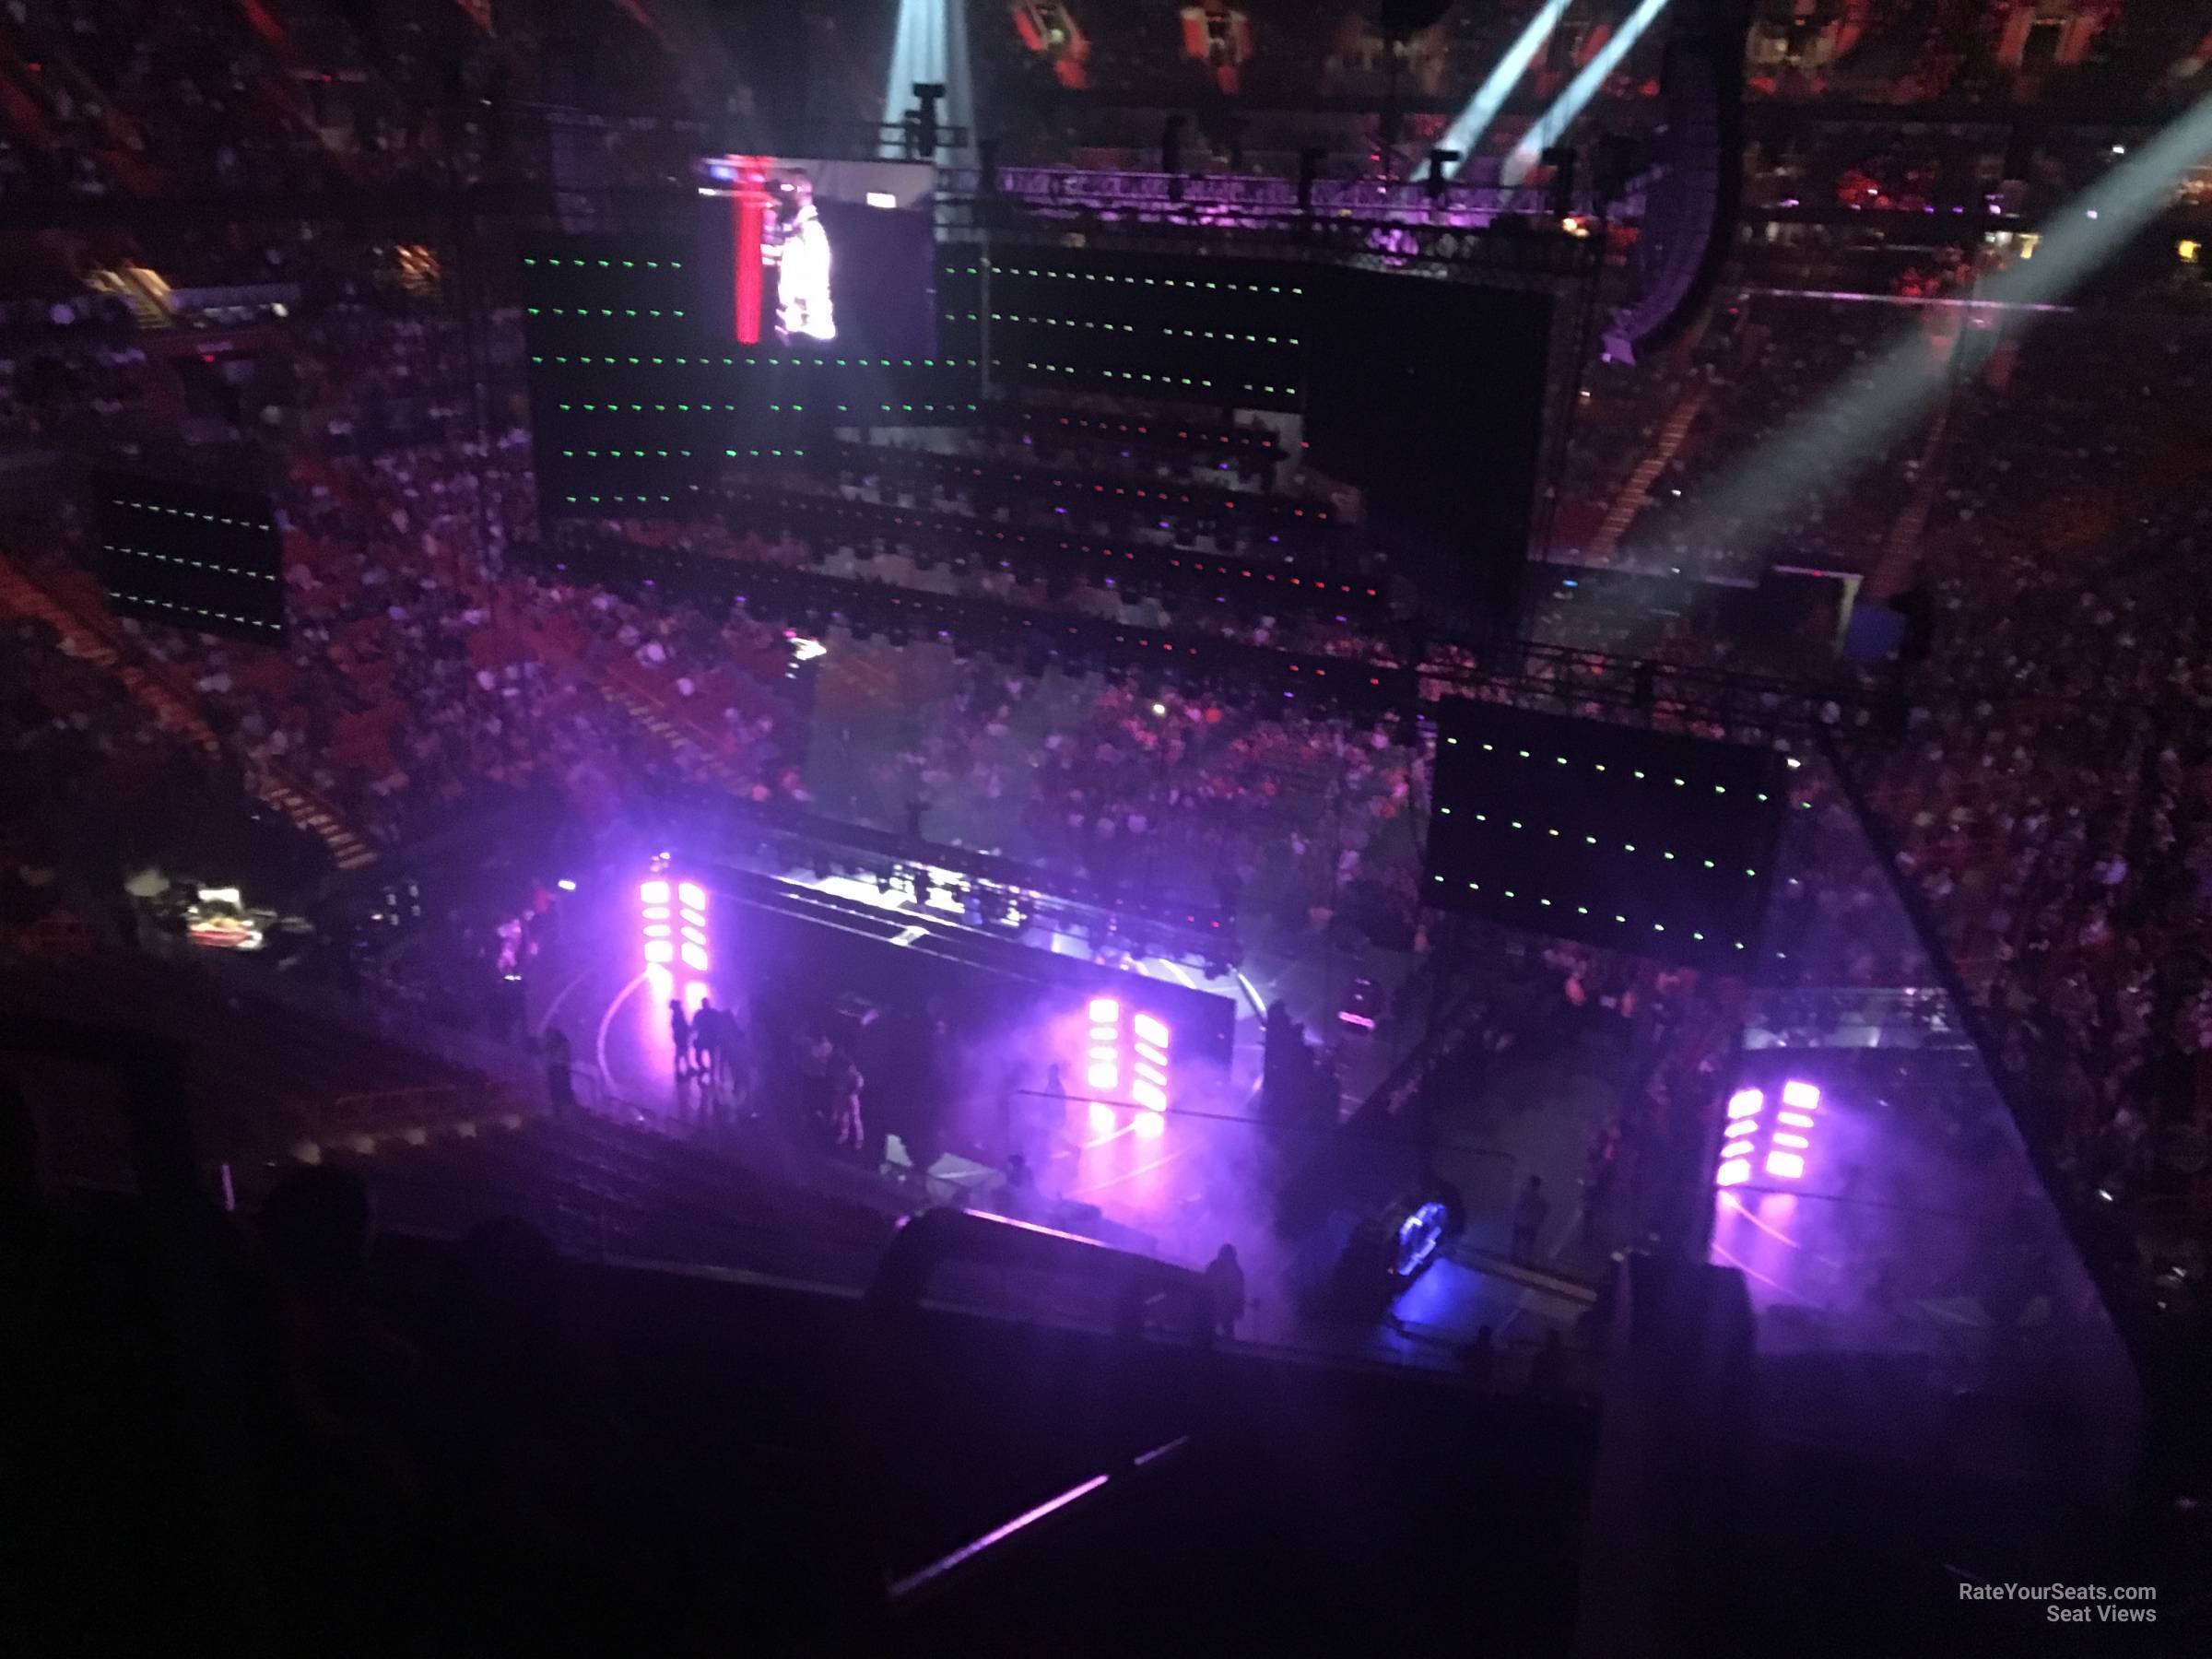 section 330, row 3 seat view  for concert - miami-dade arena